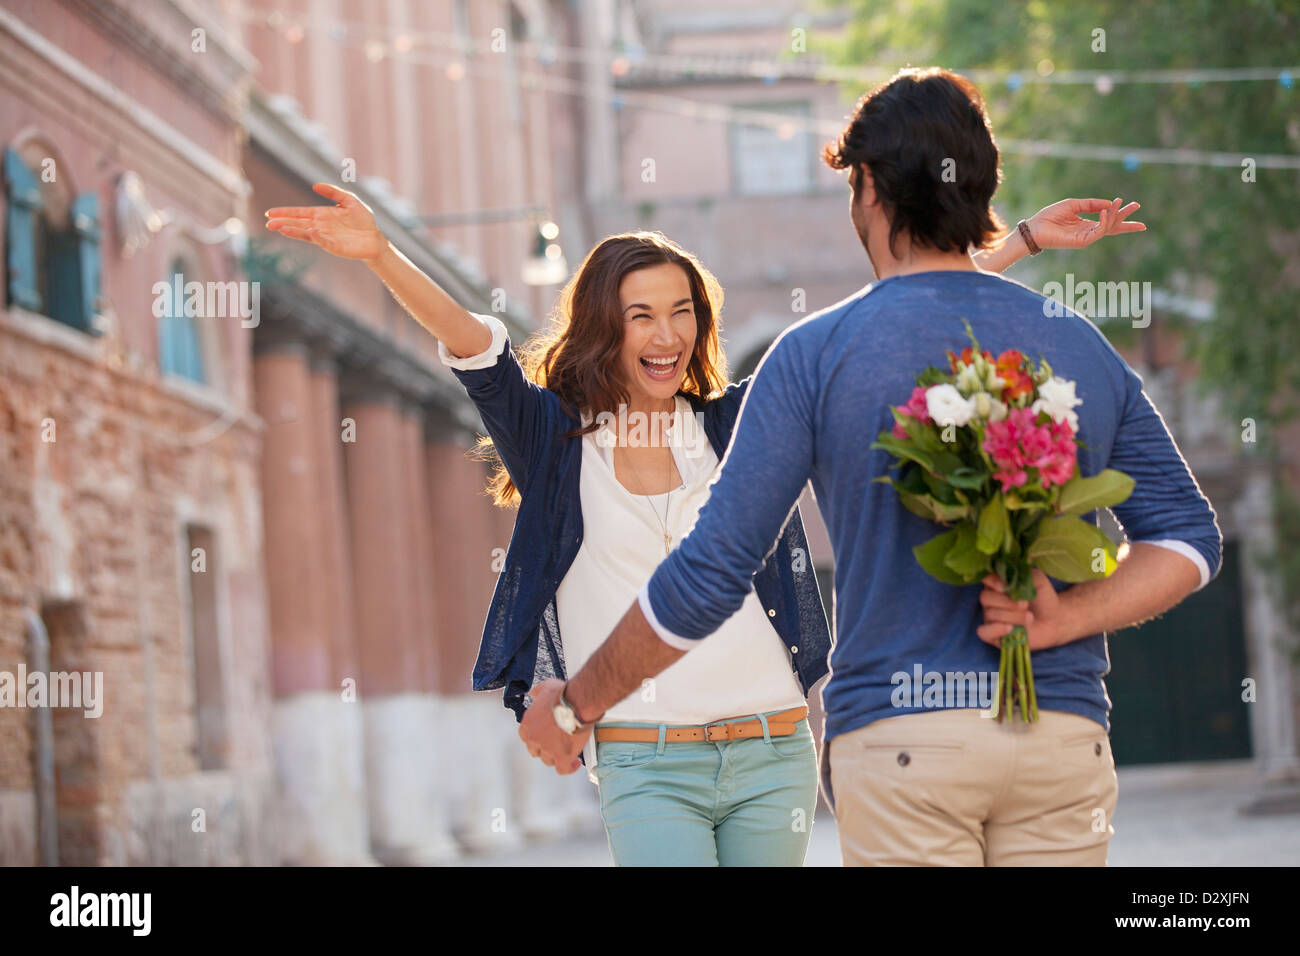 Enthusiastic woman approaching man with flowers behind back Stock Photo